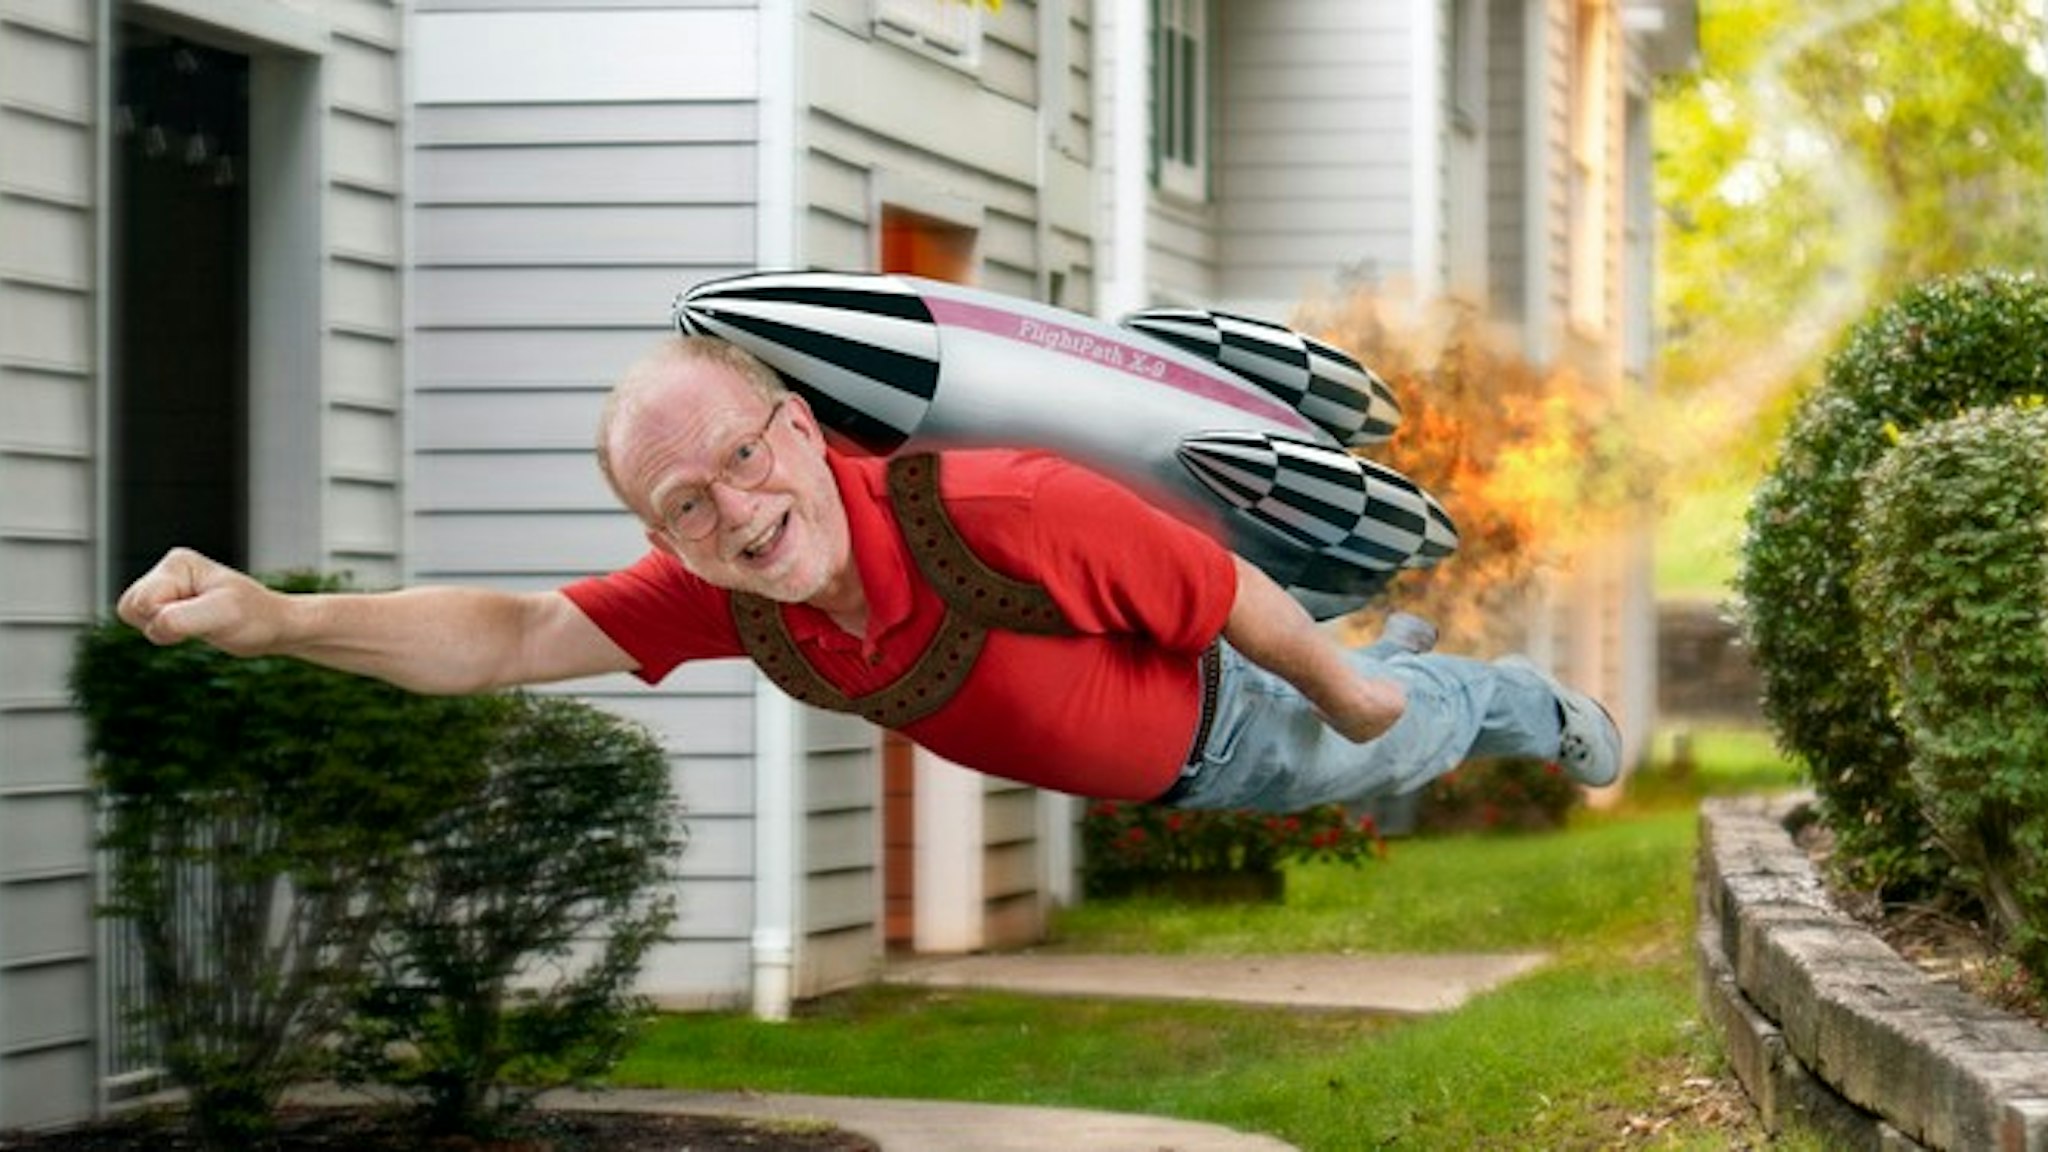 A mature man flies through the air next to an apartment building, a flaming rocket pack is strapped to his back. Smoke marks the trail behind him where he has flown.